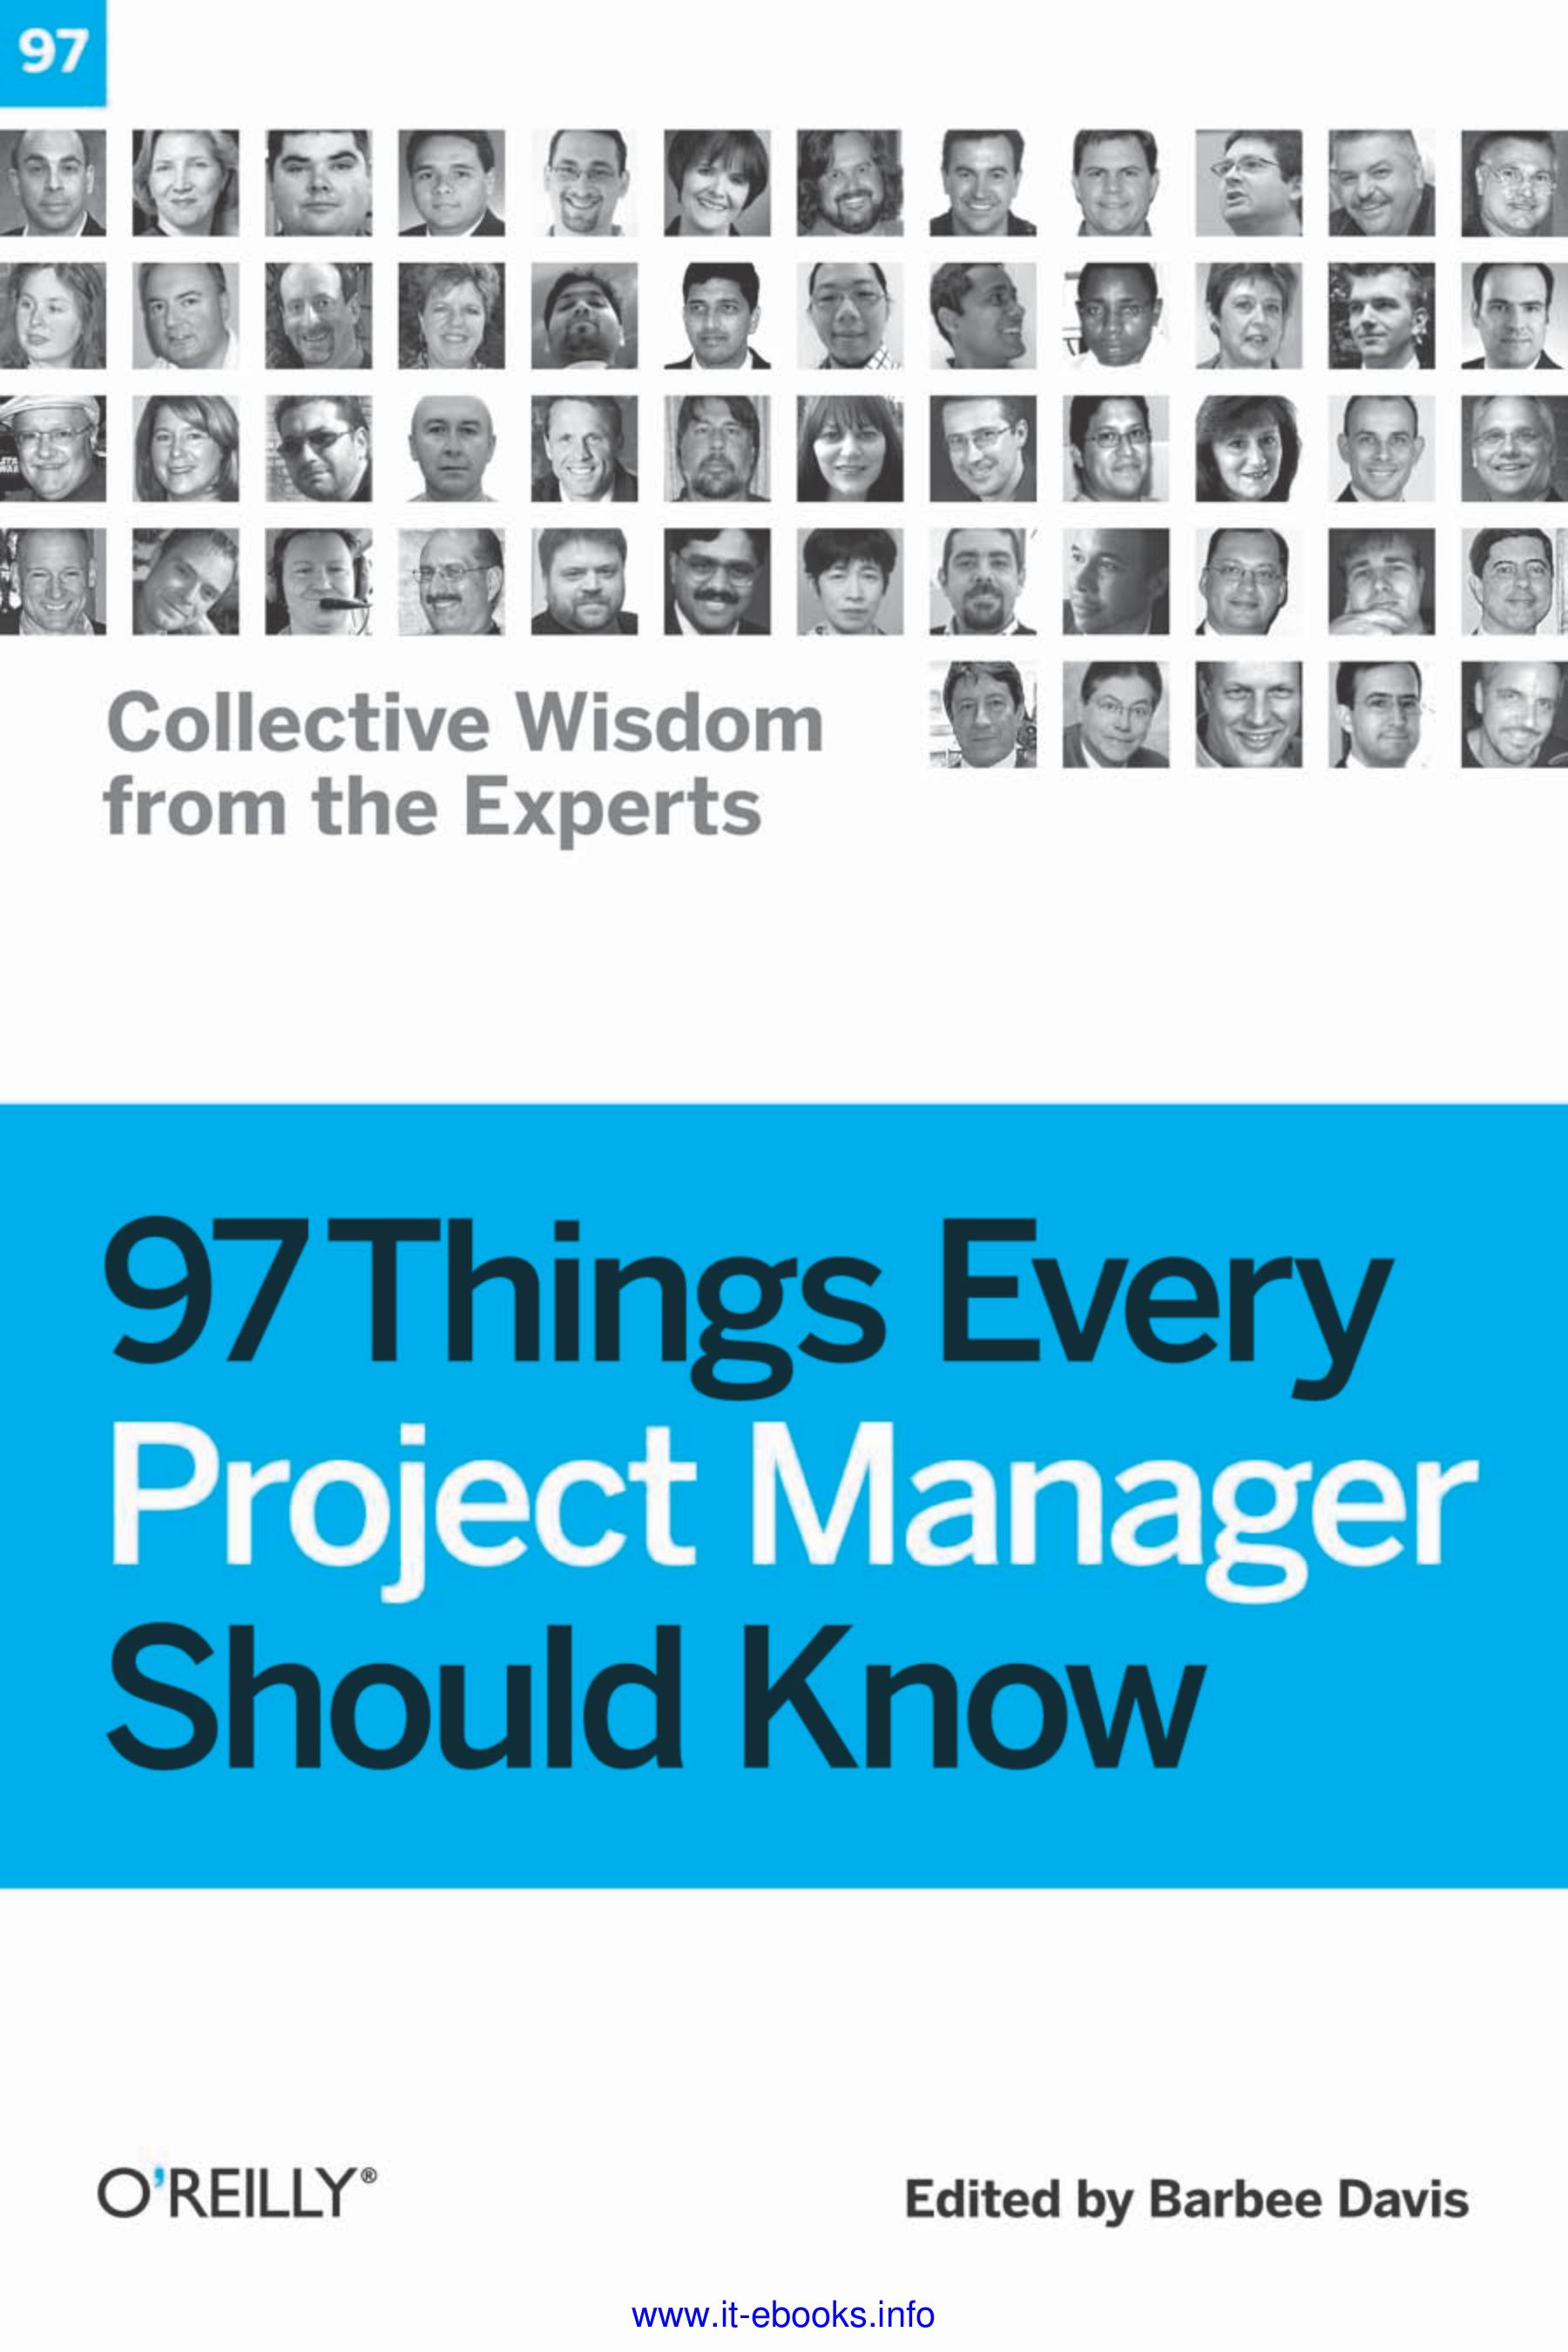 97 Things Every Project Manager Should Know -  Barbee Davis